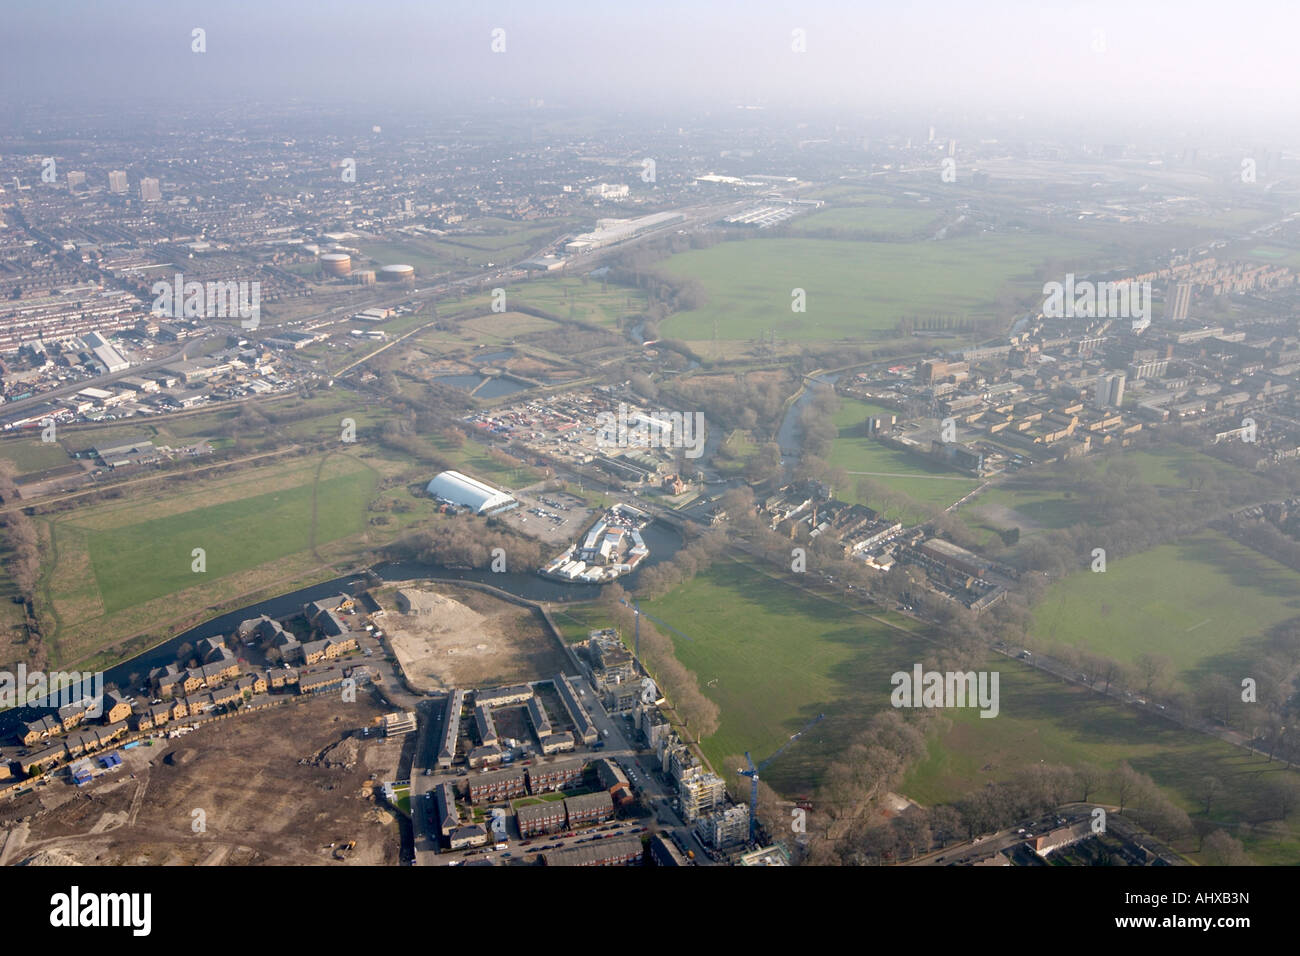 High level oblique aerial view south east of North Millfields Lea Bridge Hackney Marshes London E5 England UK January 2006 Stock Photo